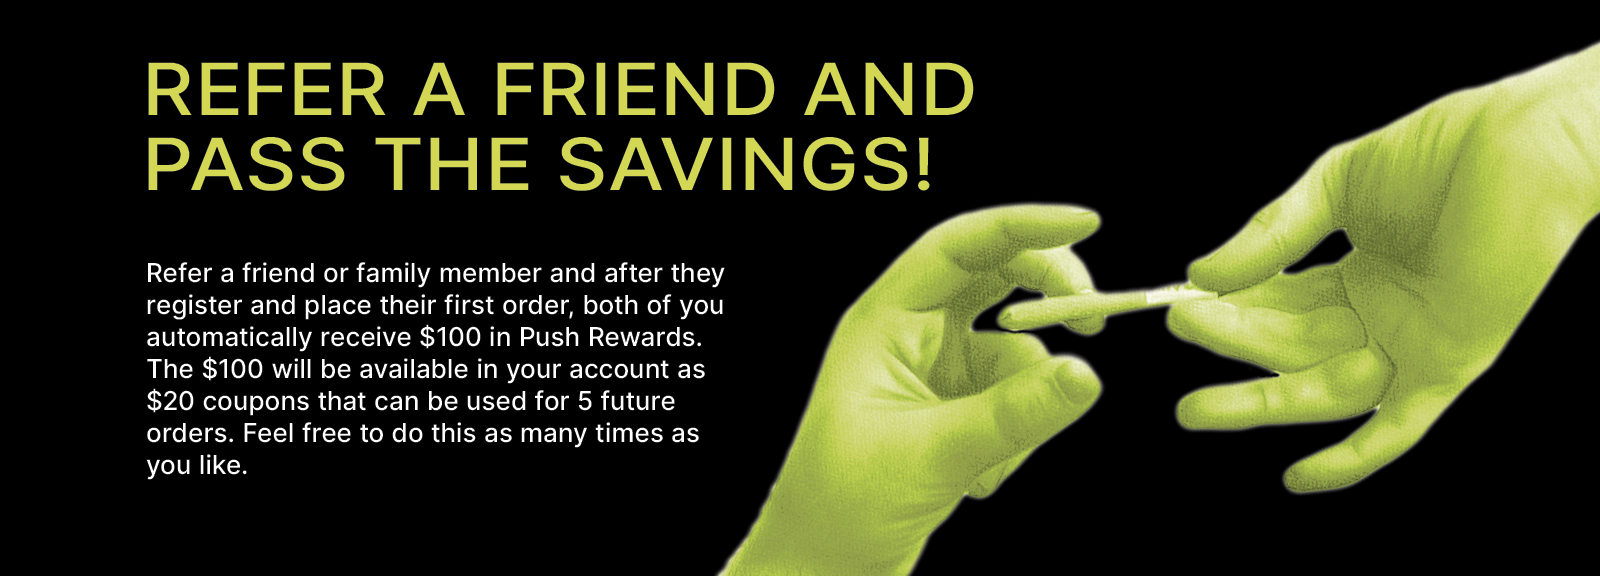 refer a friend and pass the savings